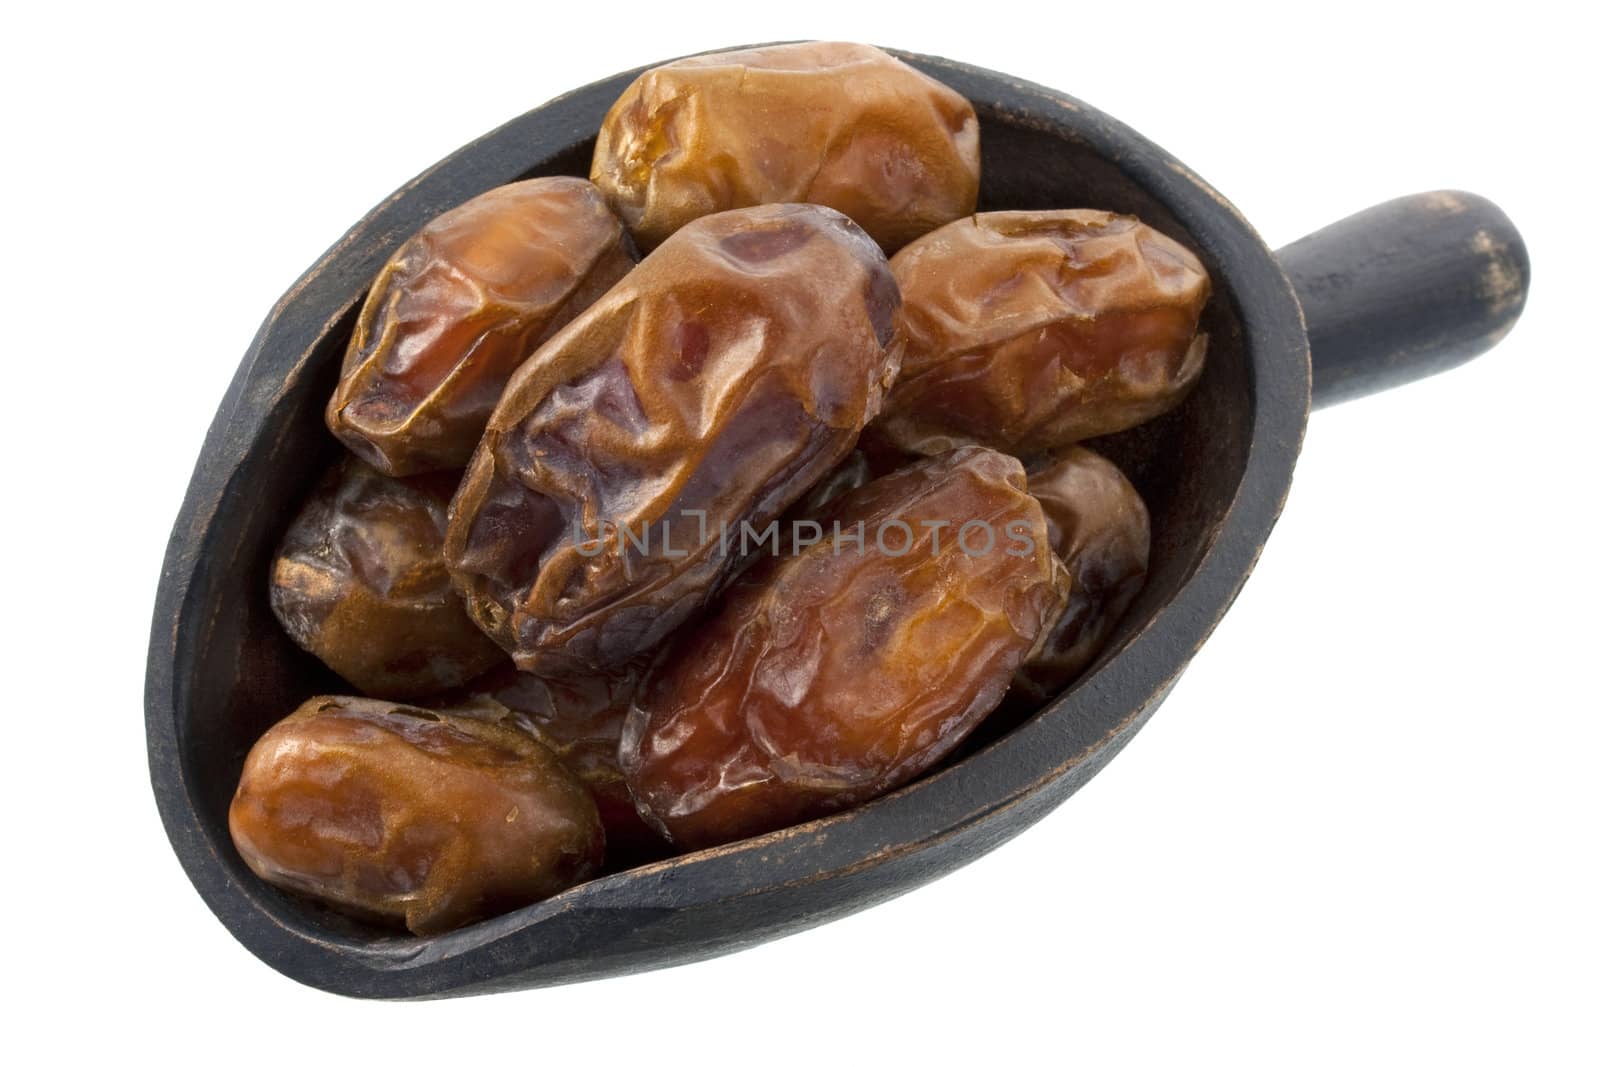 dried medjool dates on a rustic, wooden scoop, isolated on white